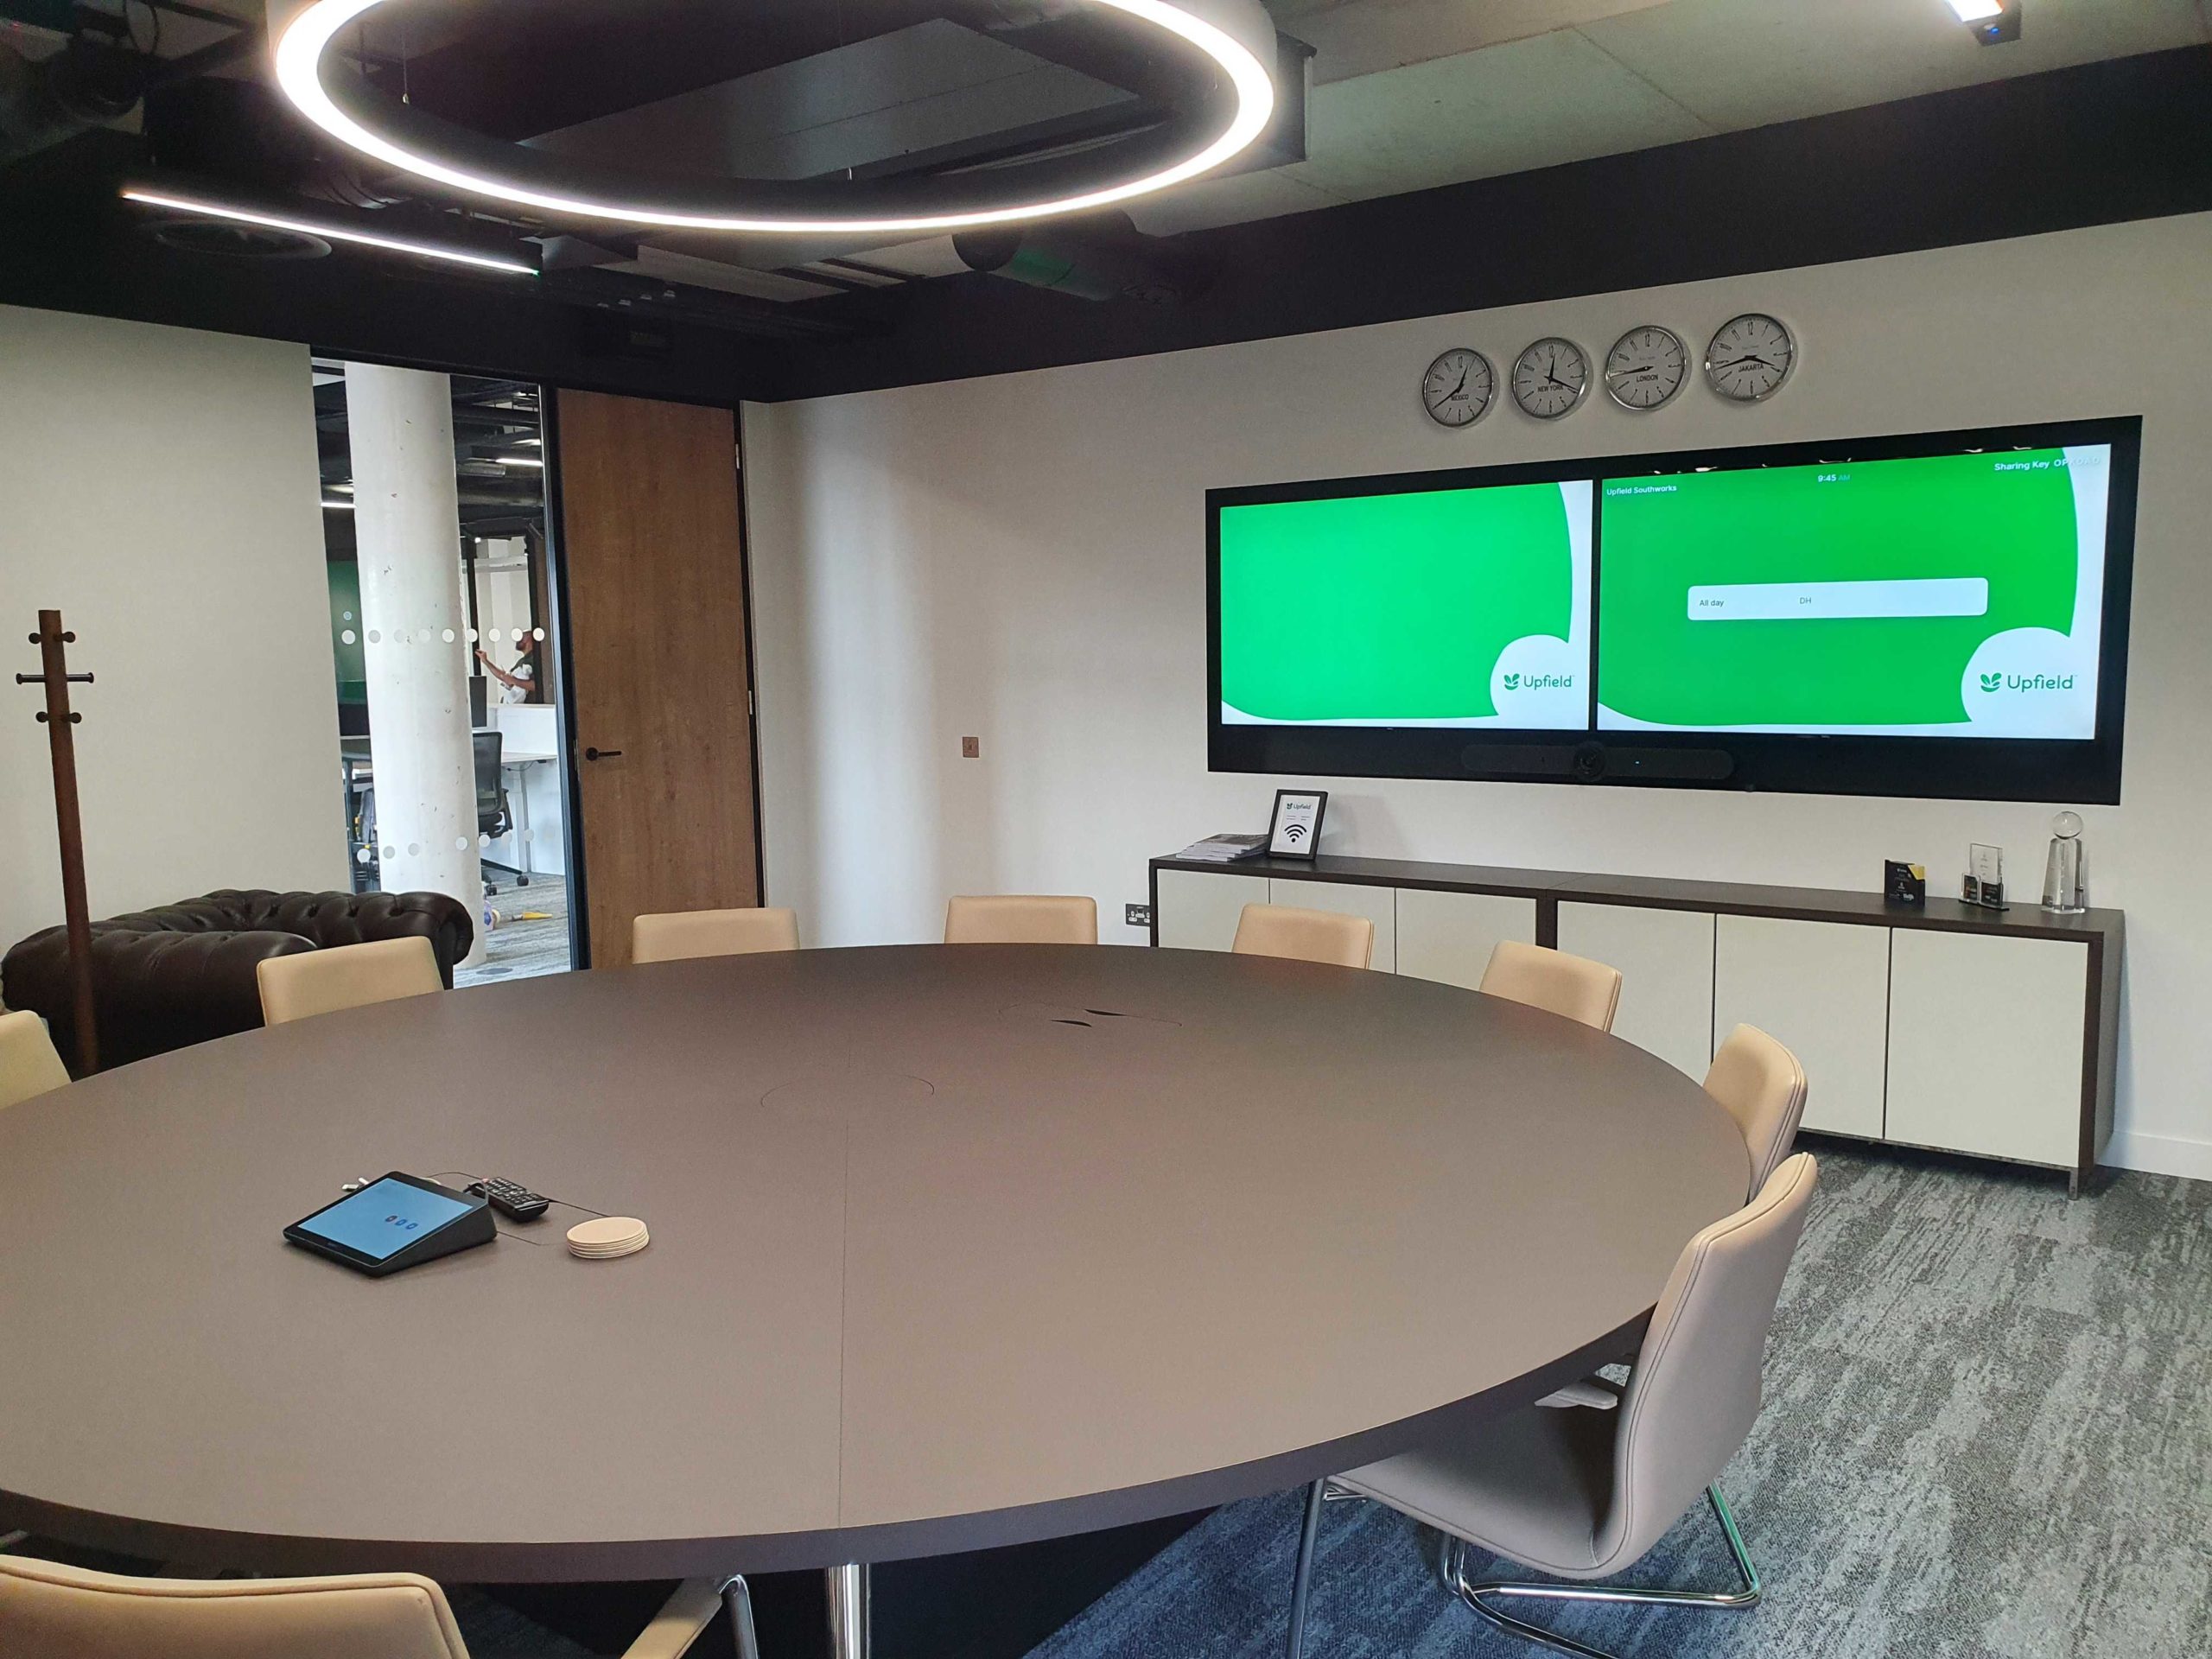 Upfield London new office meeting room with technology installed by Runtech